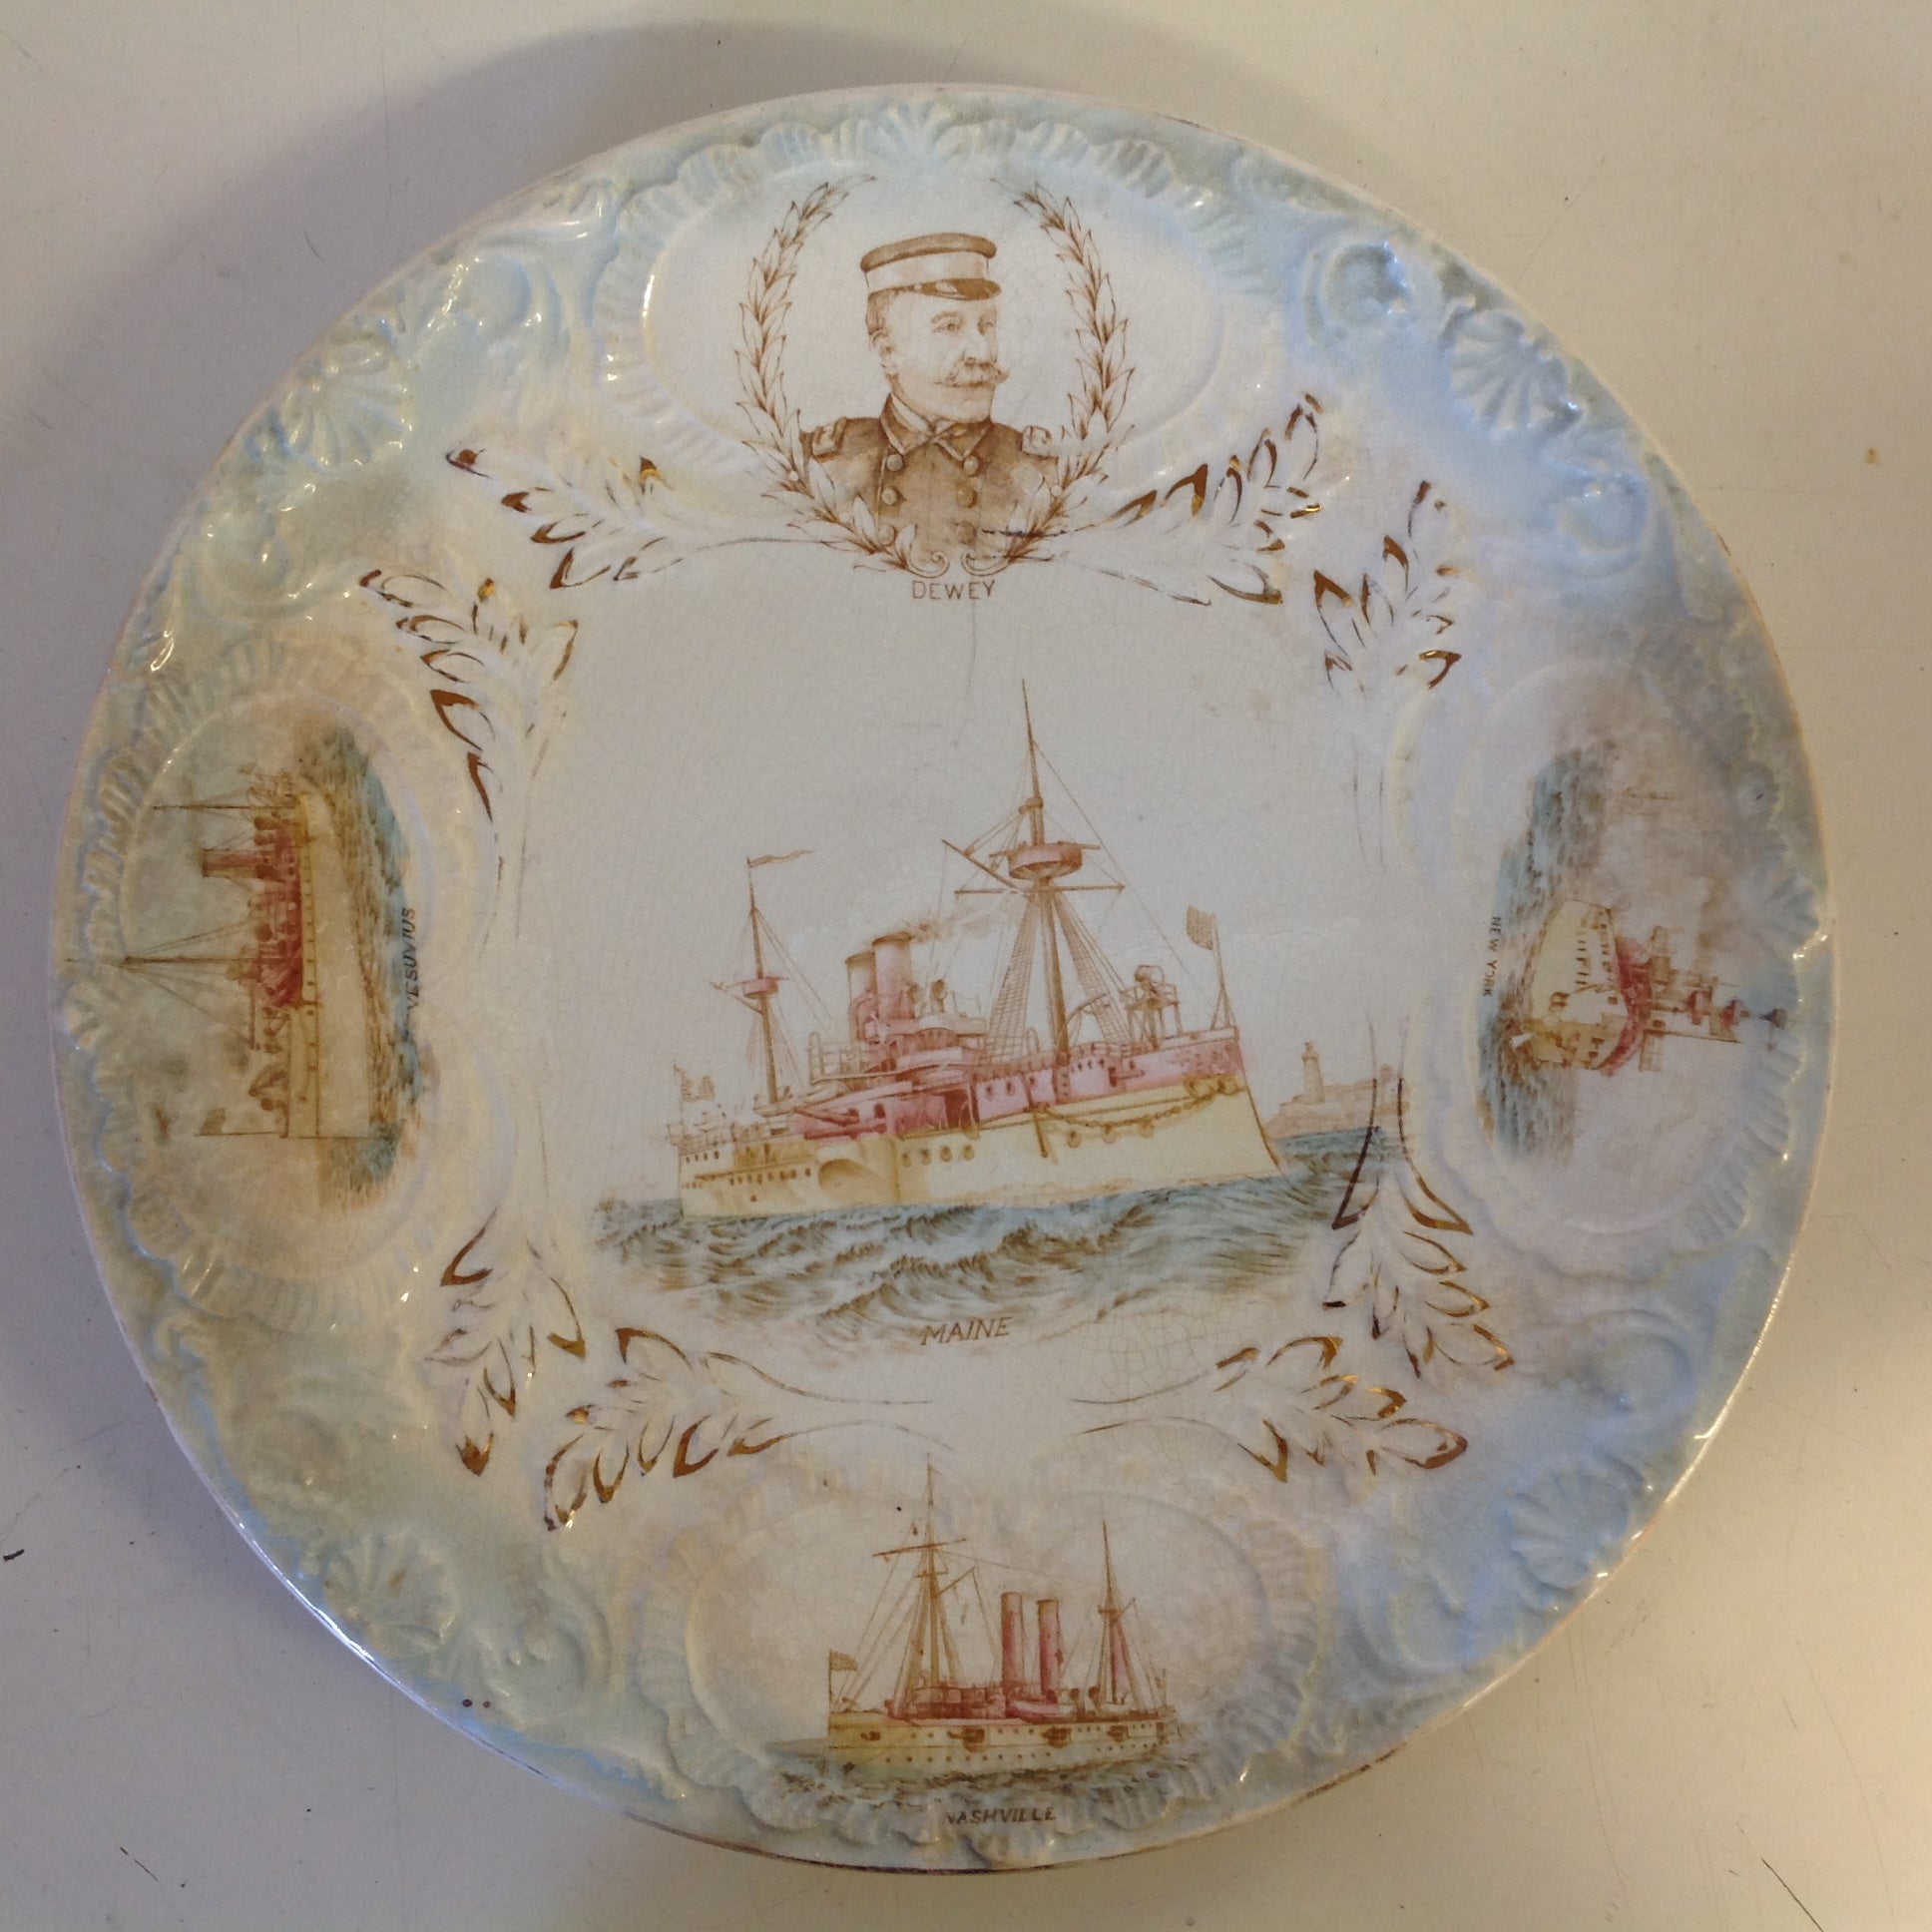 Vintage Spanish-American War Era The Sebring Porcelain Collectors' Plate with US Warships and Admiral Dewey